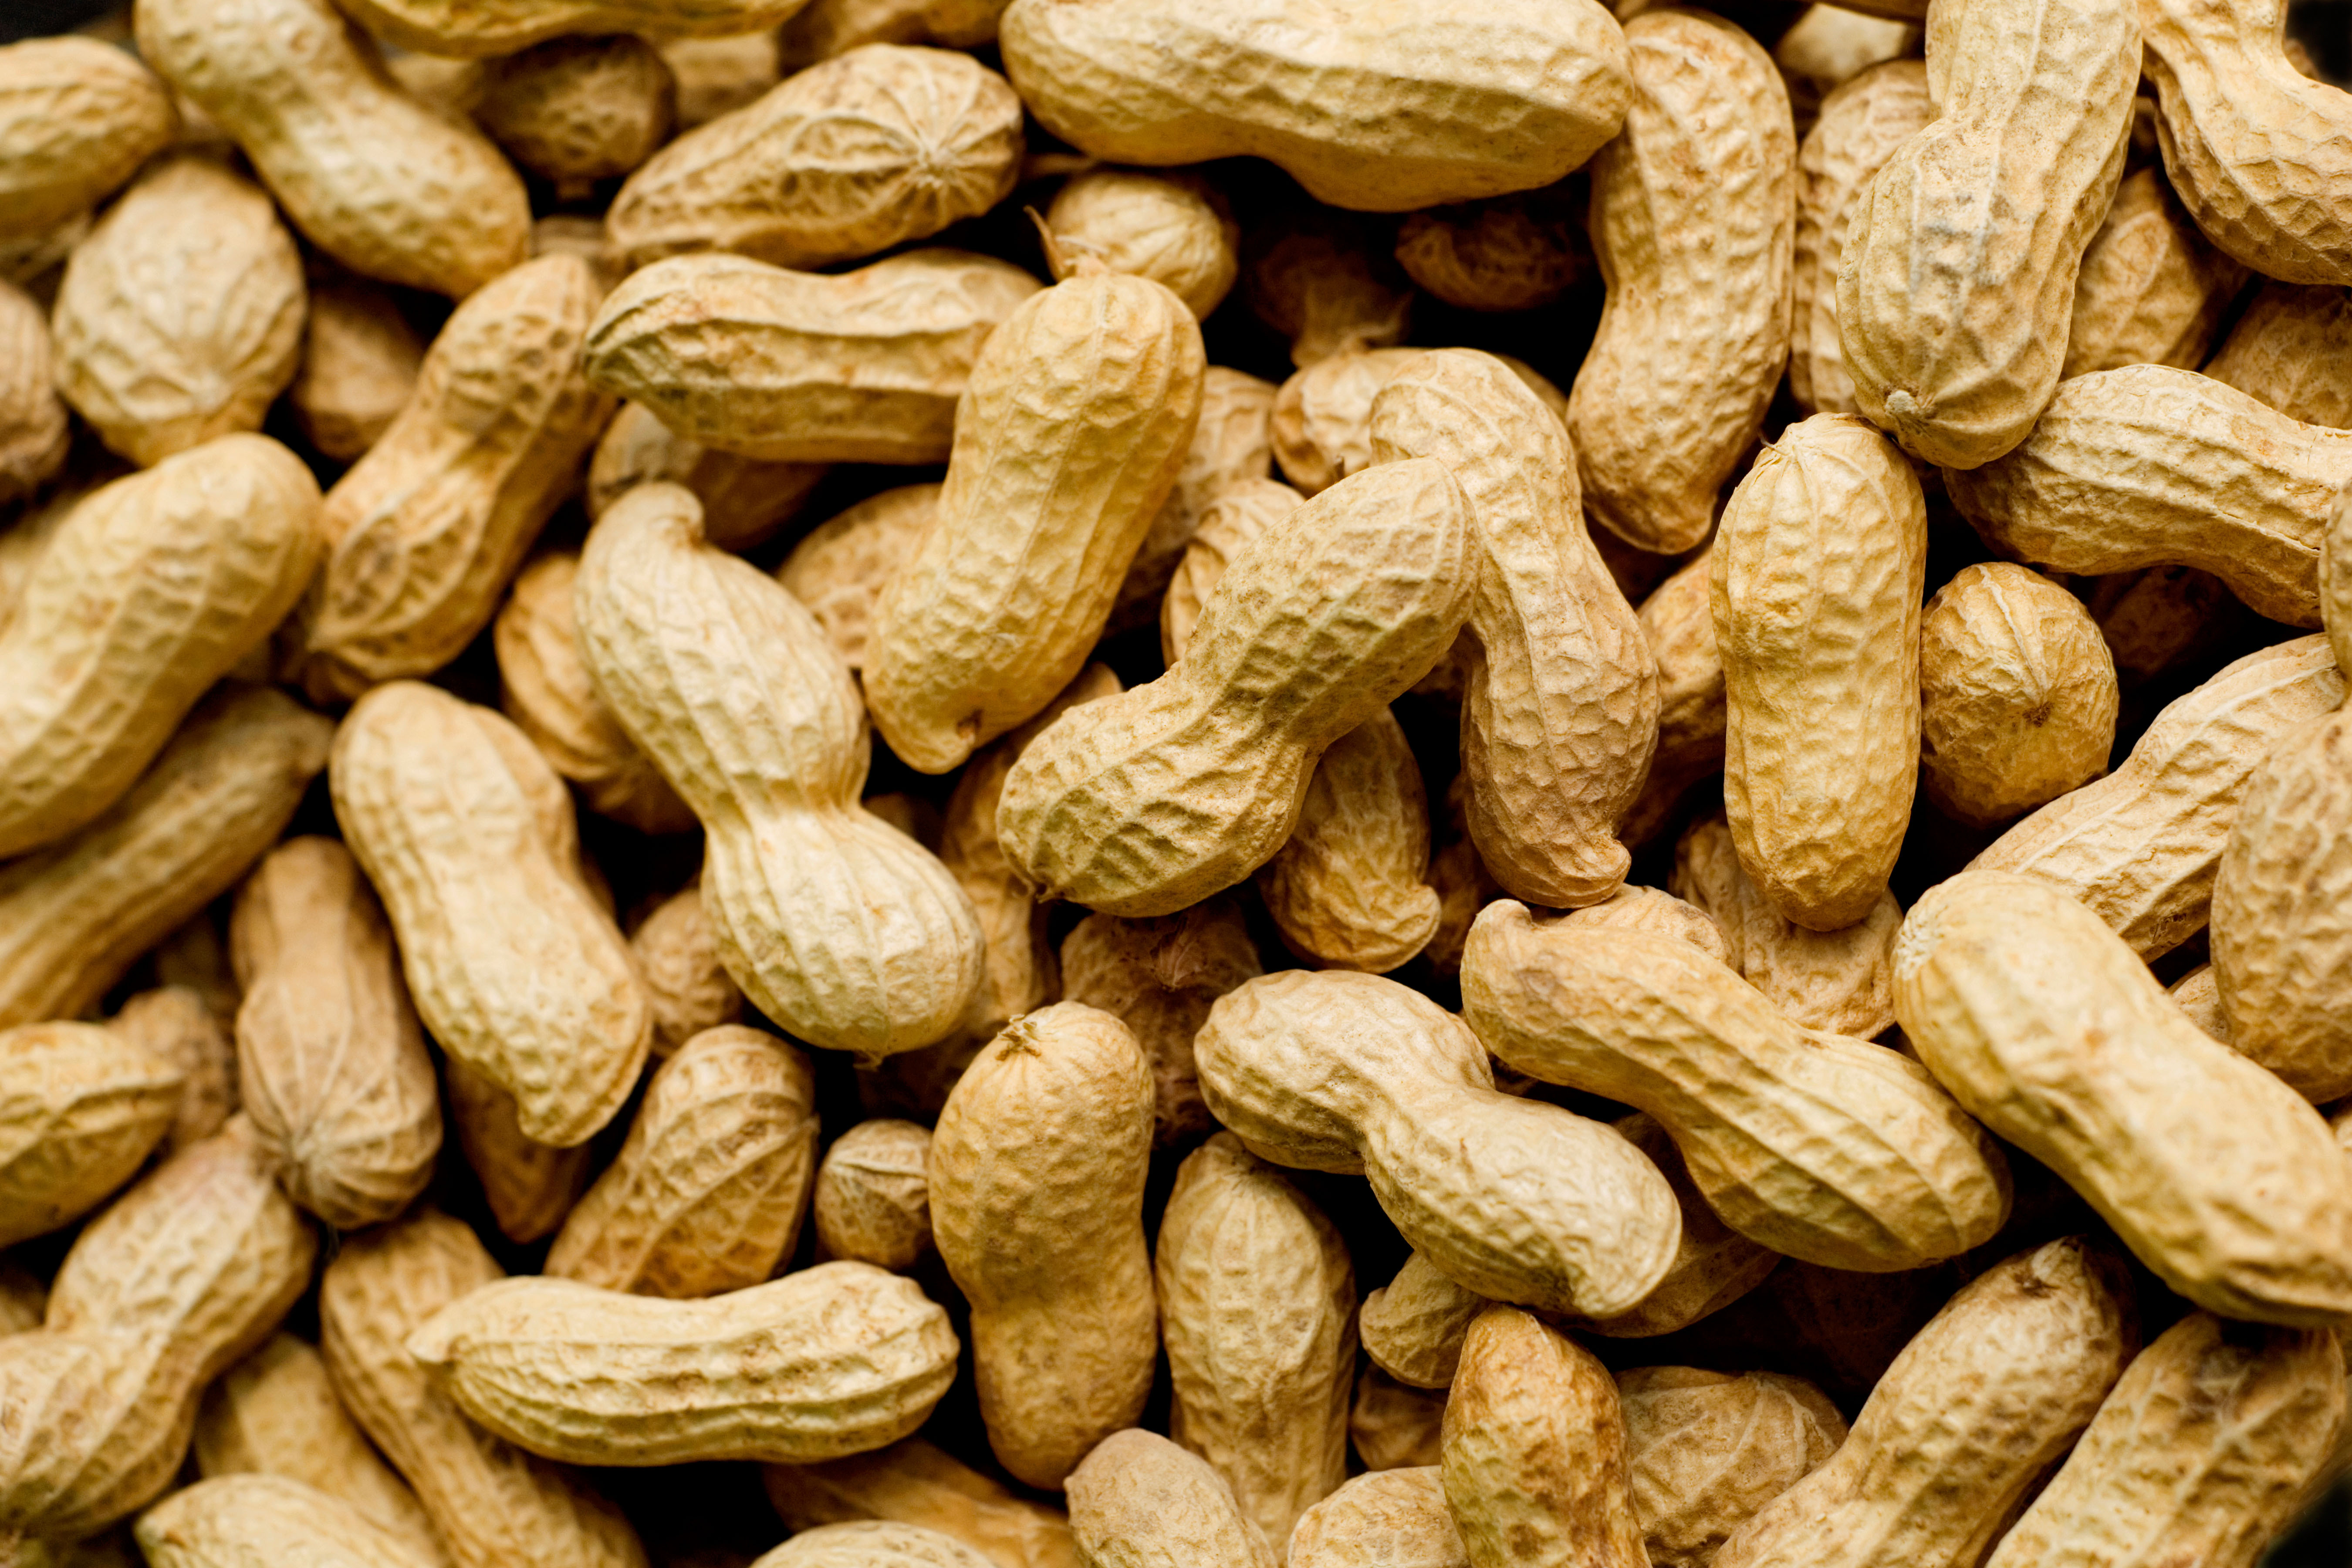 Peanut Production in Alabama is a huge business, as this historic state harvests over 400 million pounds of this valuable commodity.